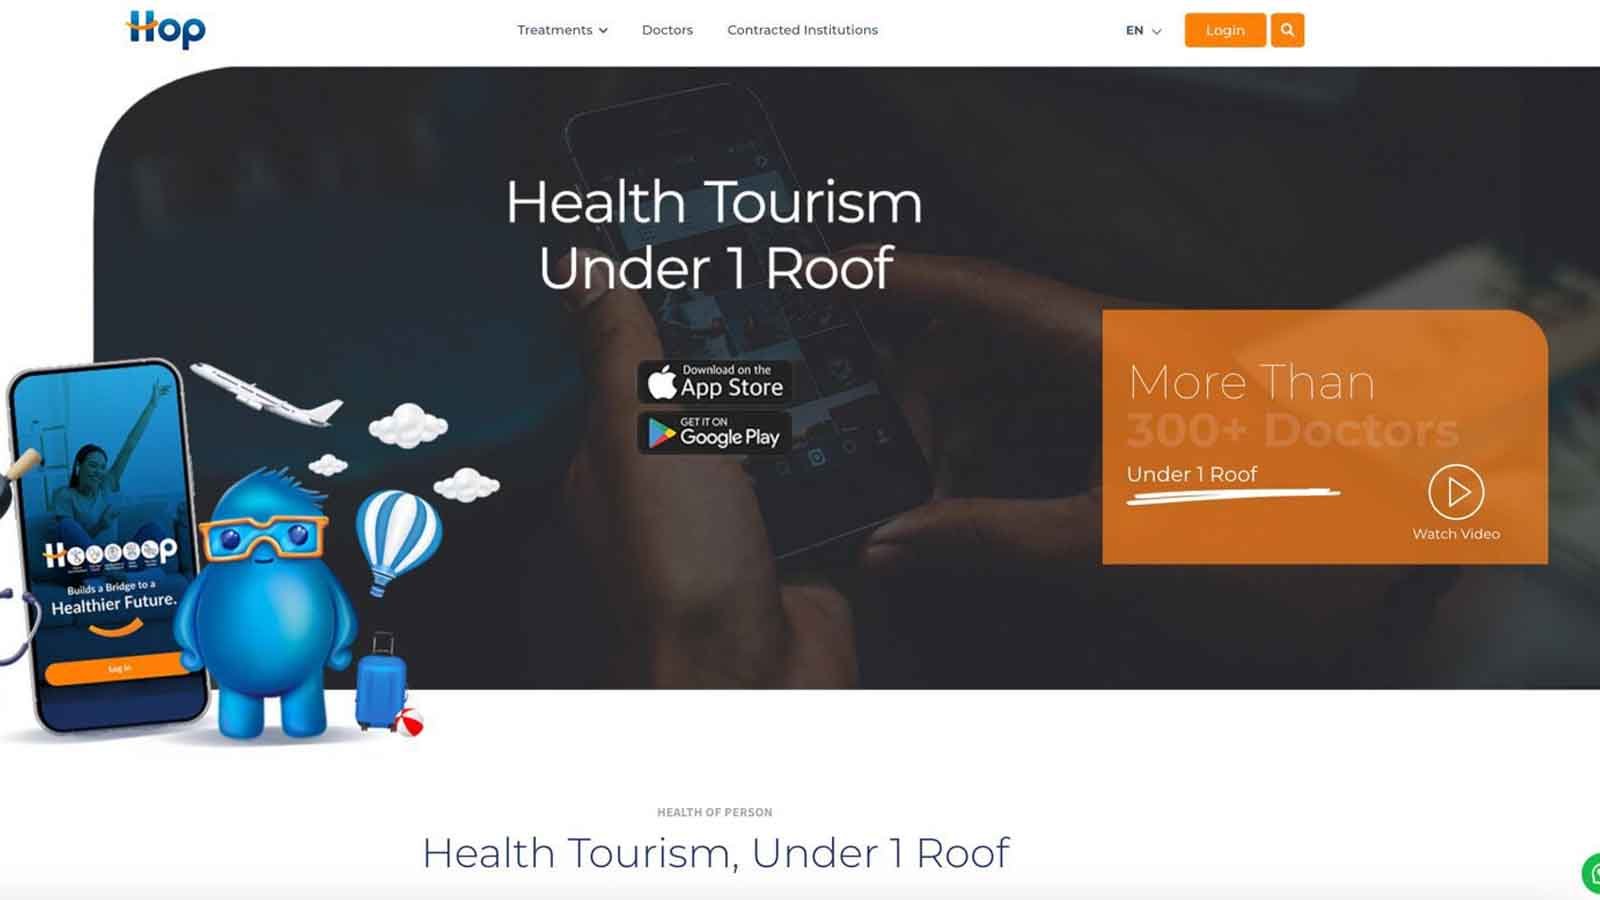 Digital Innovation in Health Tourism: Hop Health Expands into the Global Market with $1 Million Investment